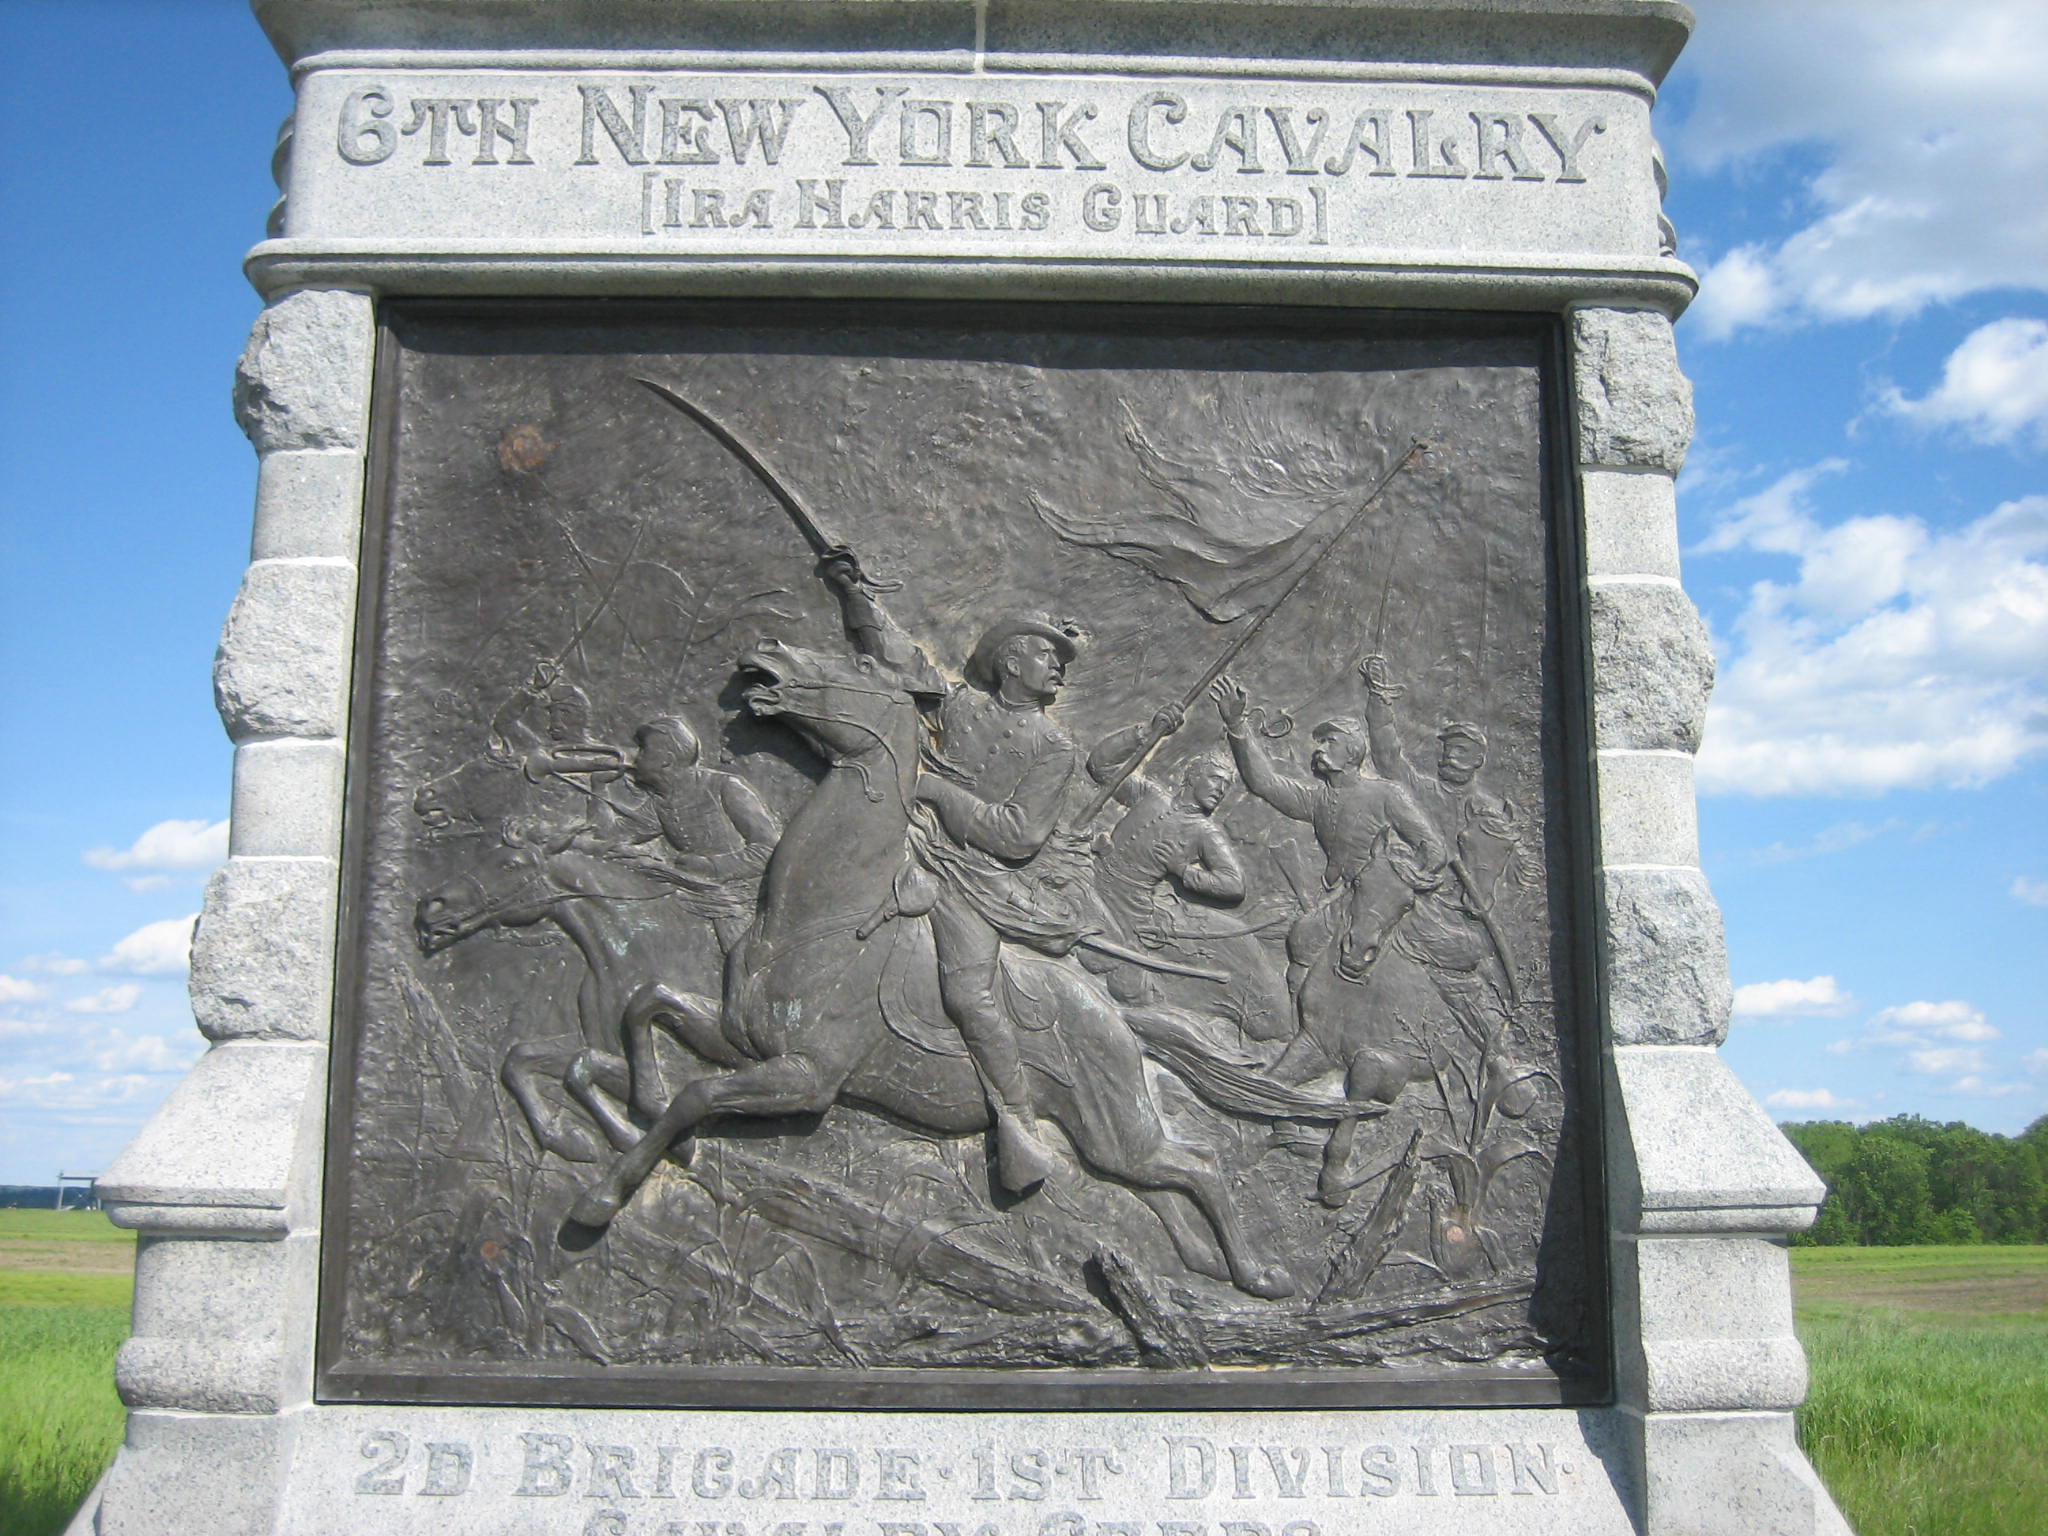 Restoration Work on the 6th New York Cavalry Monument Completed ...